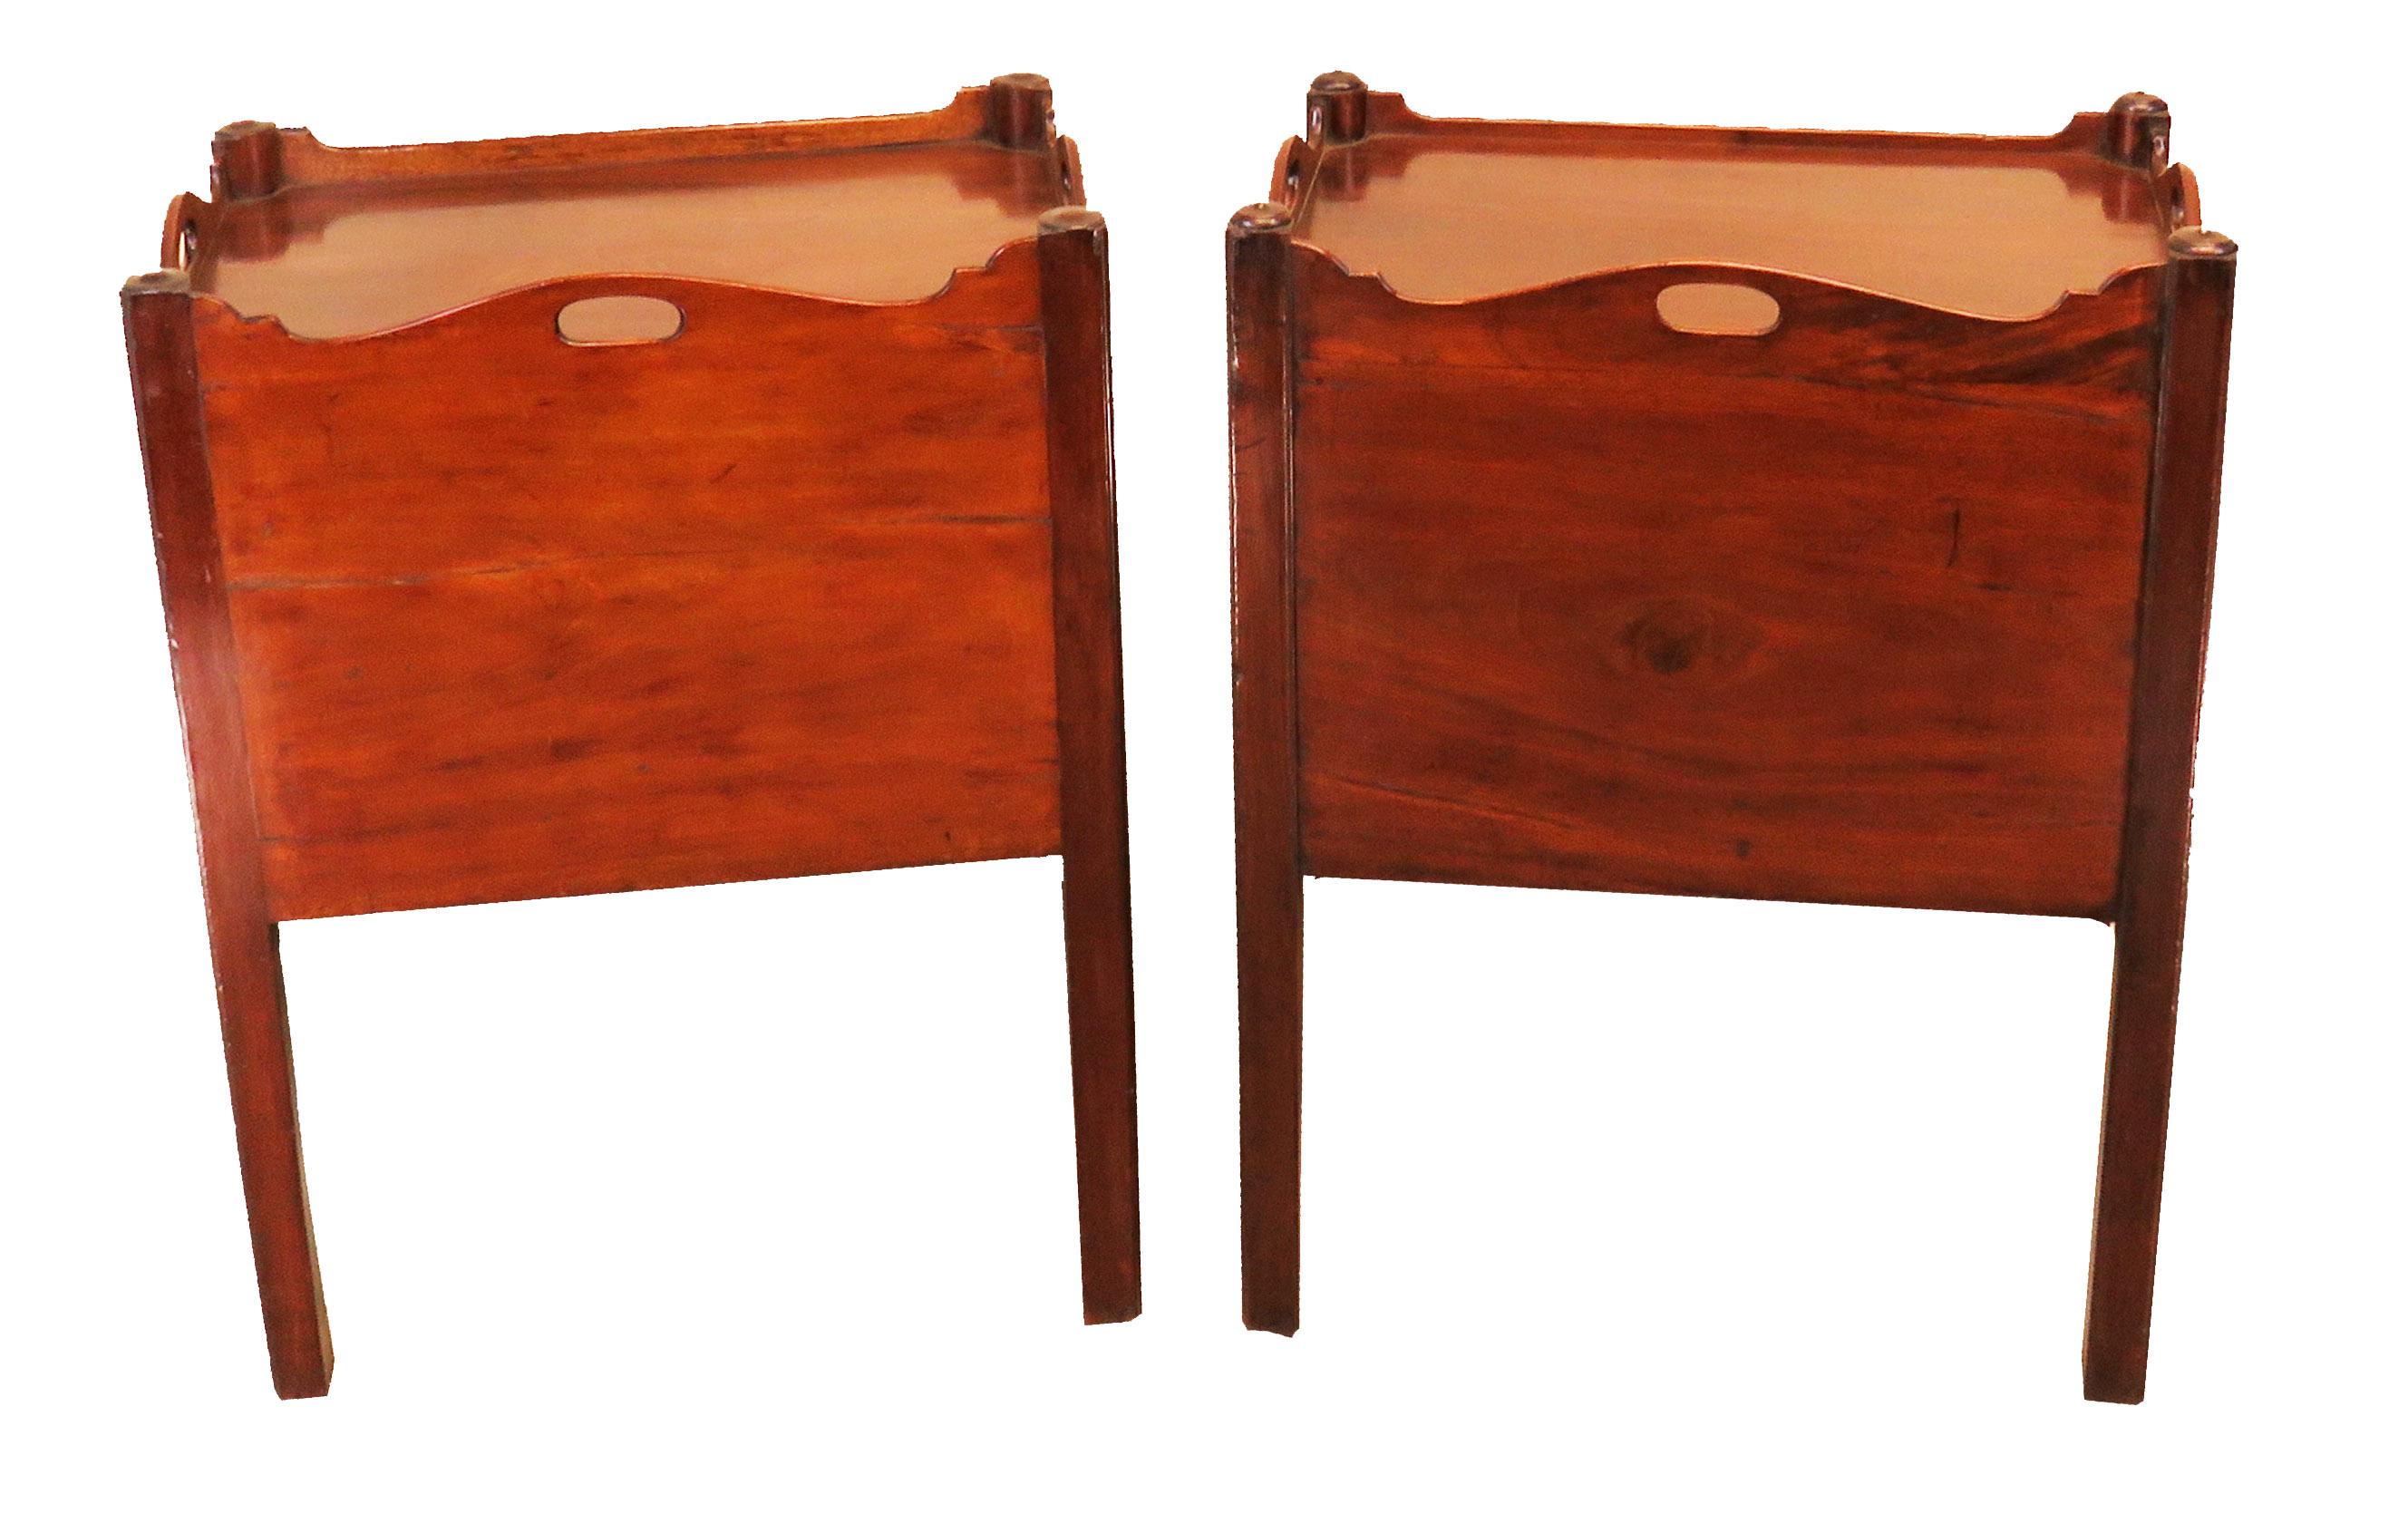 Georgian English 18th Century Matched Pair of Mahogany Bedside Night Tables